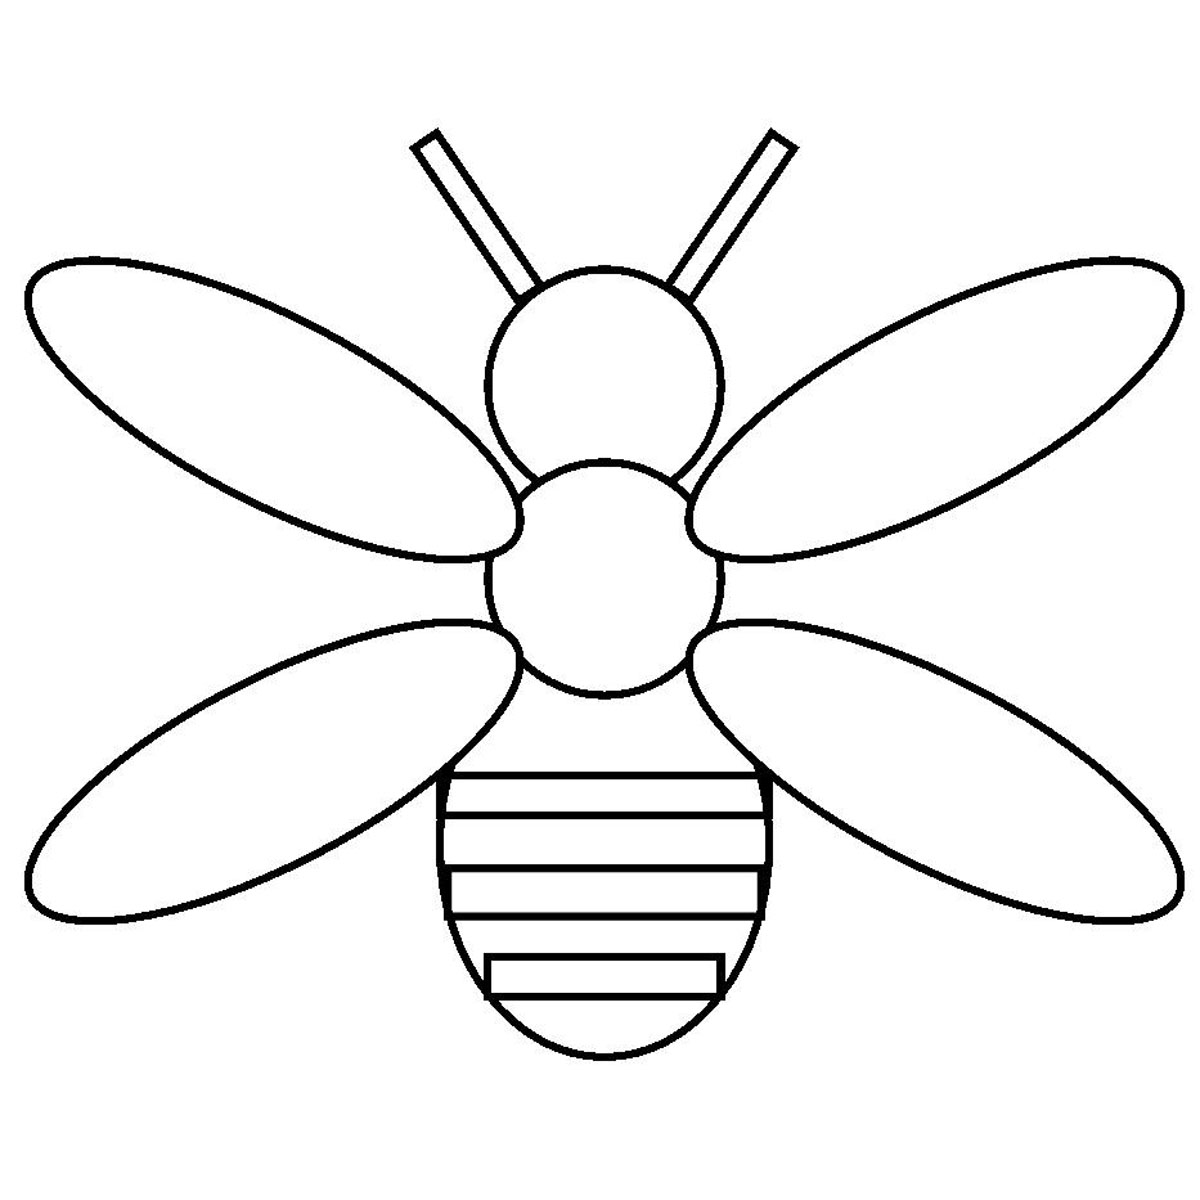 Lightning bug coloring pages - Coloring Pages & Pictures - IMAGIXS